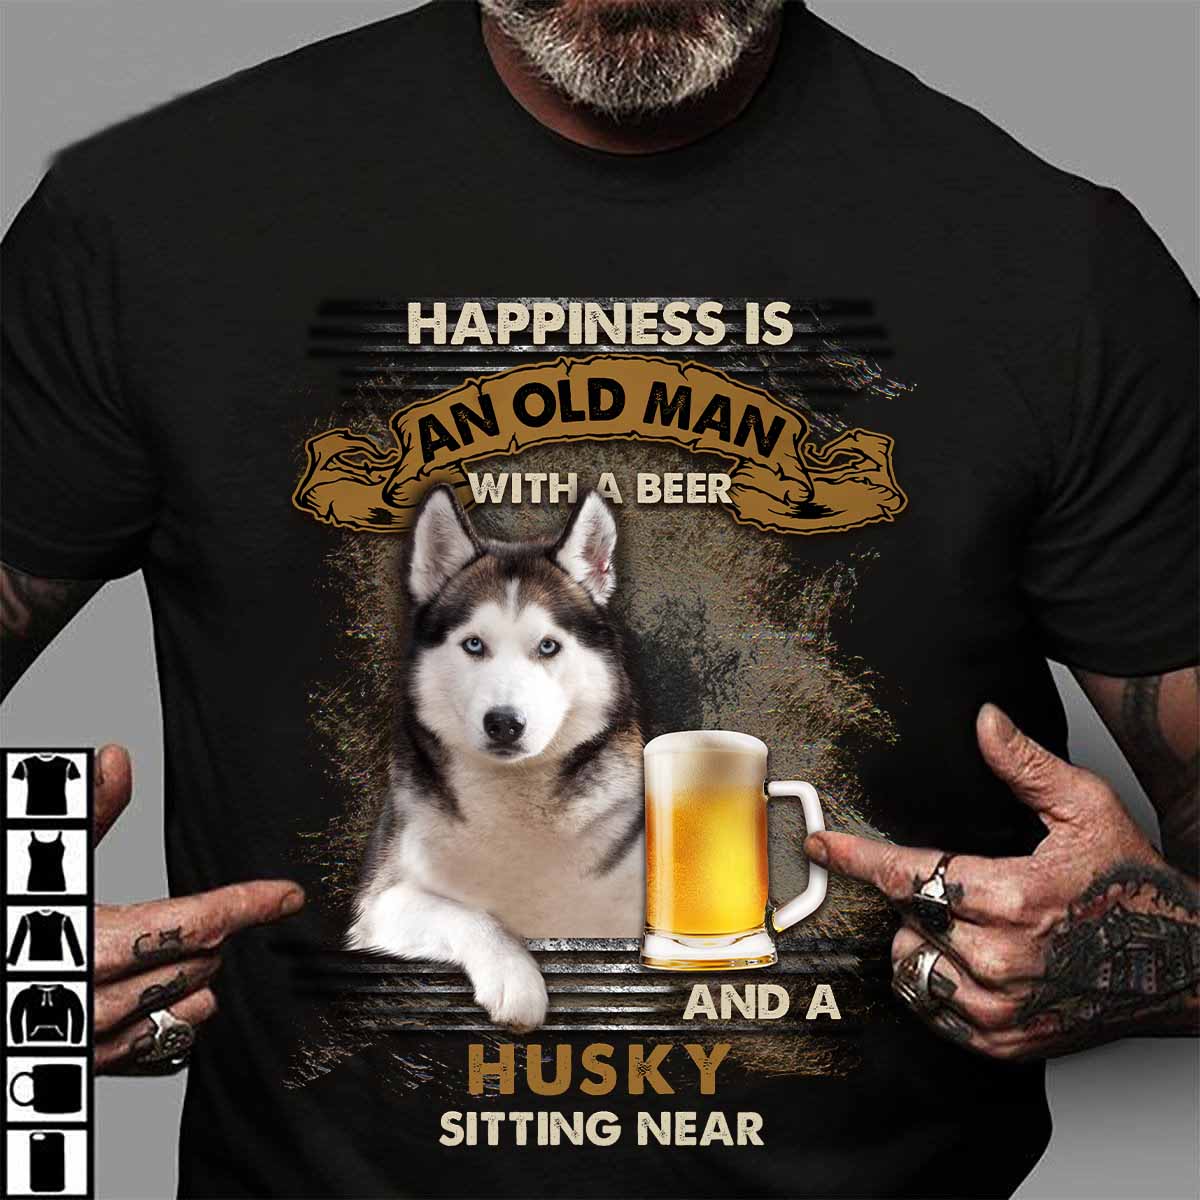 Happiness is an old man with a beer and a Husky sitting near - Husky dog